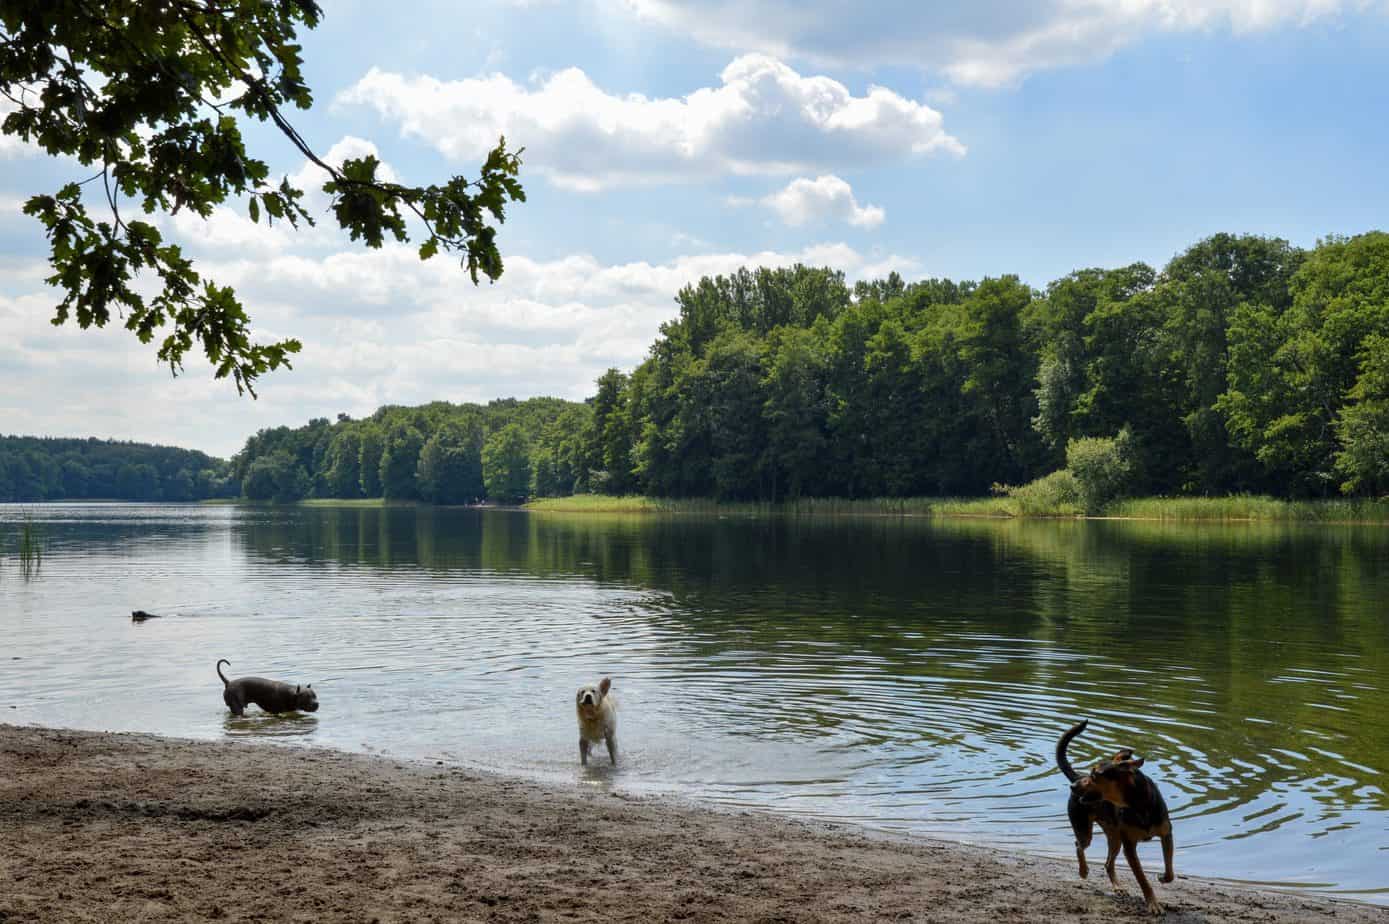 Dogs play in the lake water surrounded by forested trees.